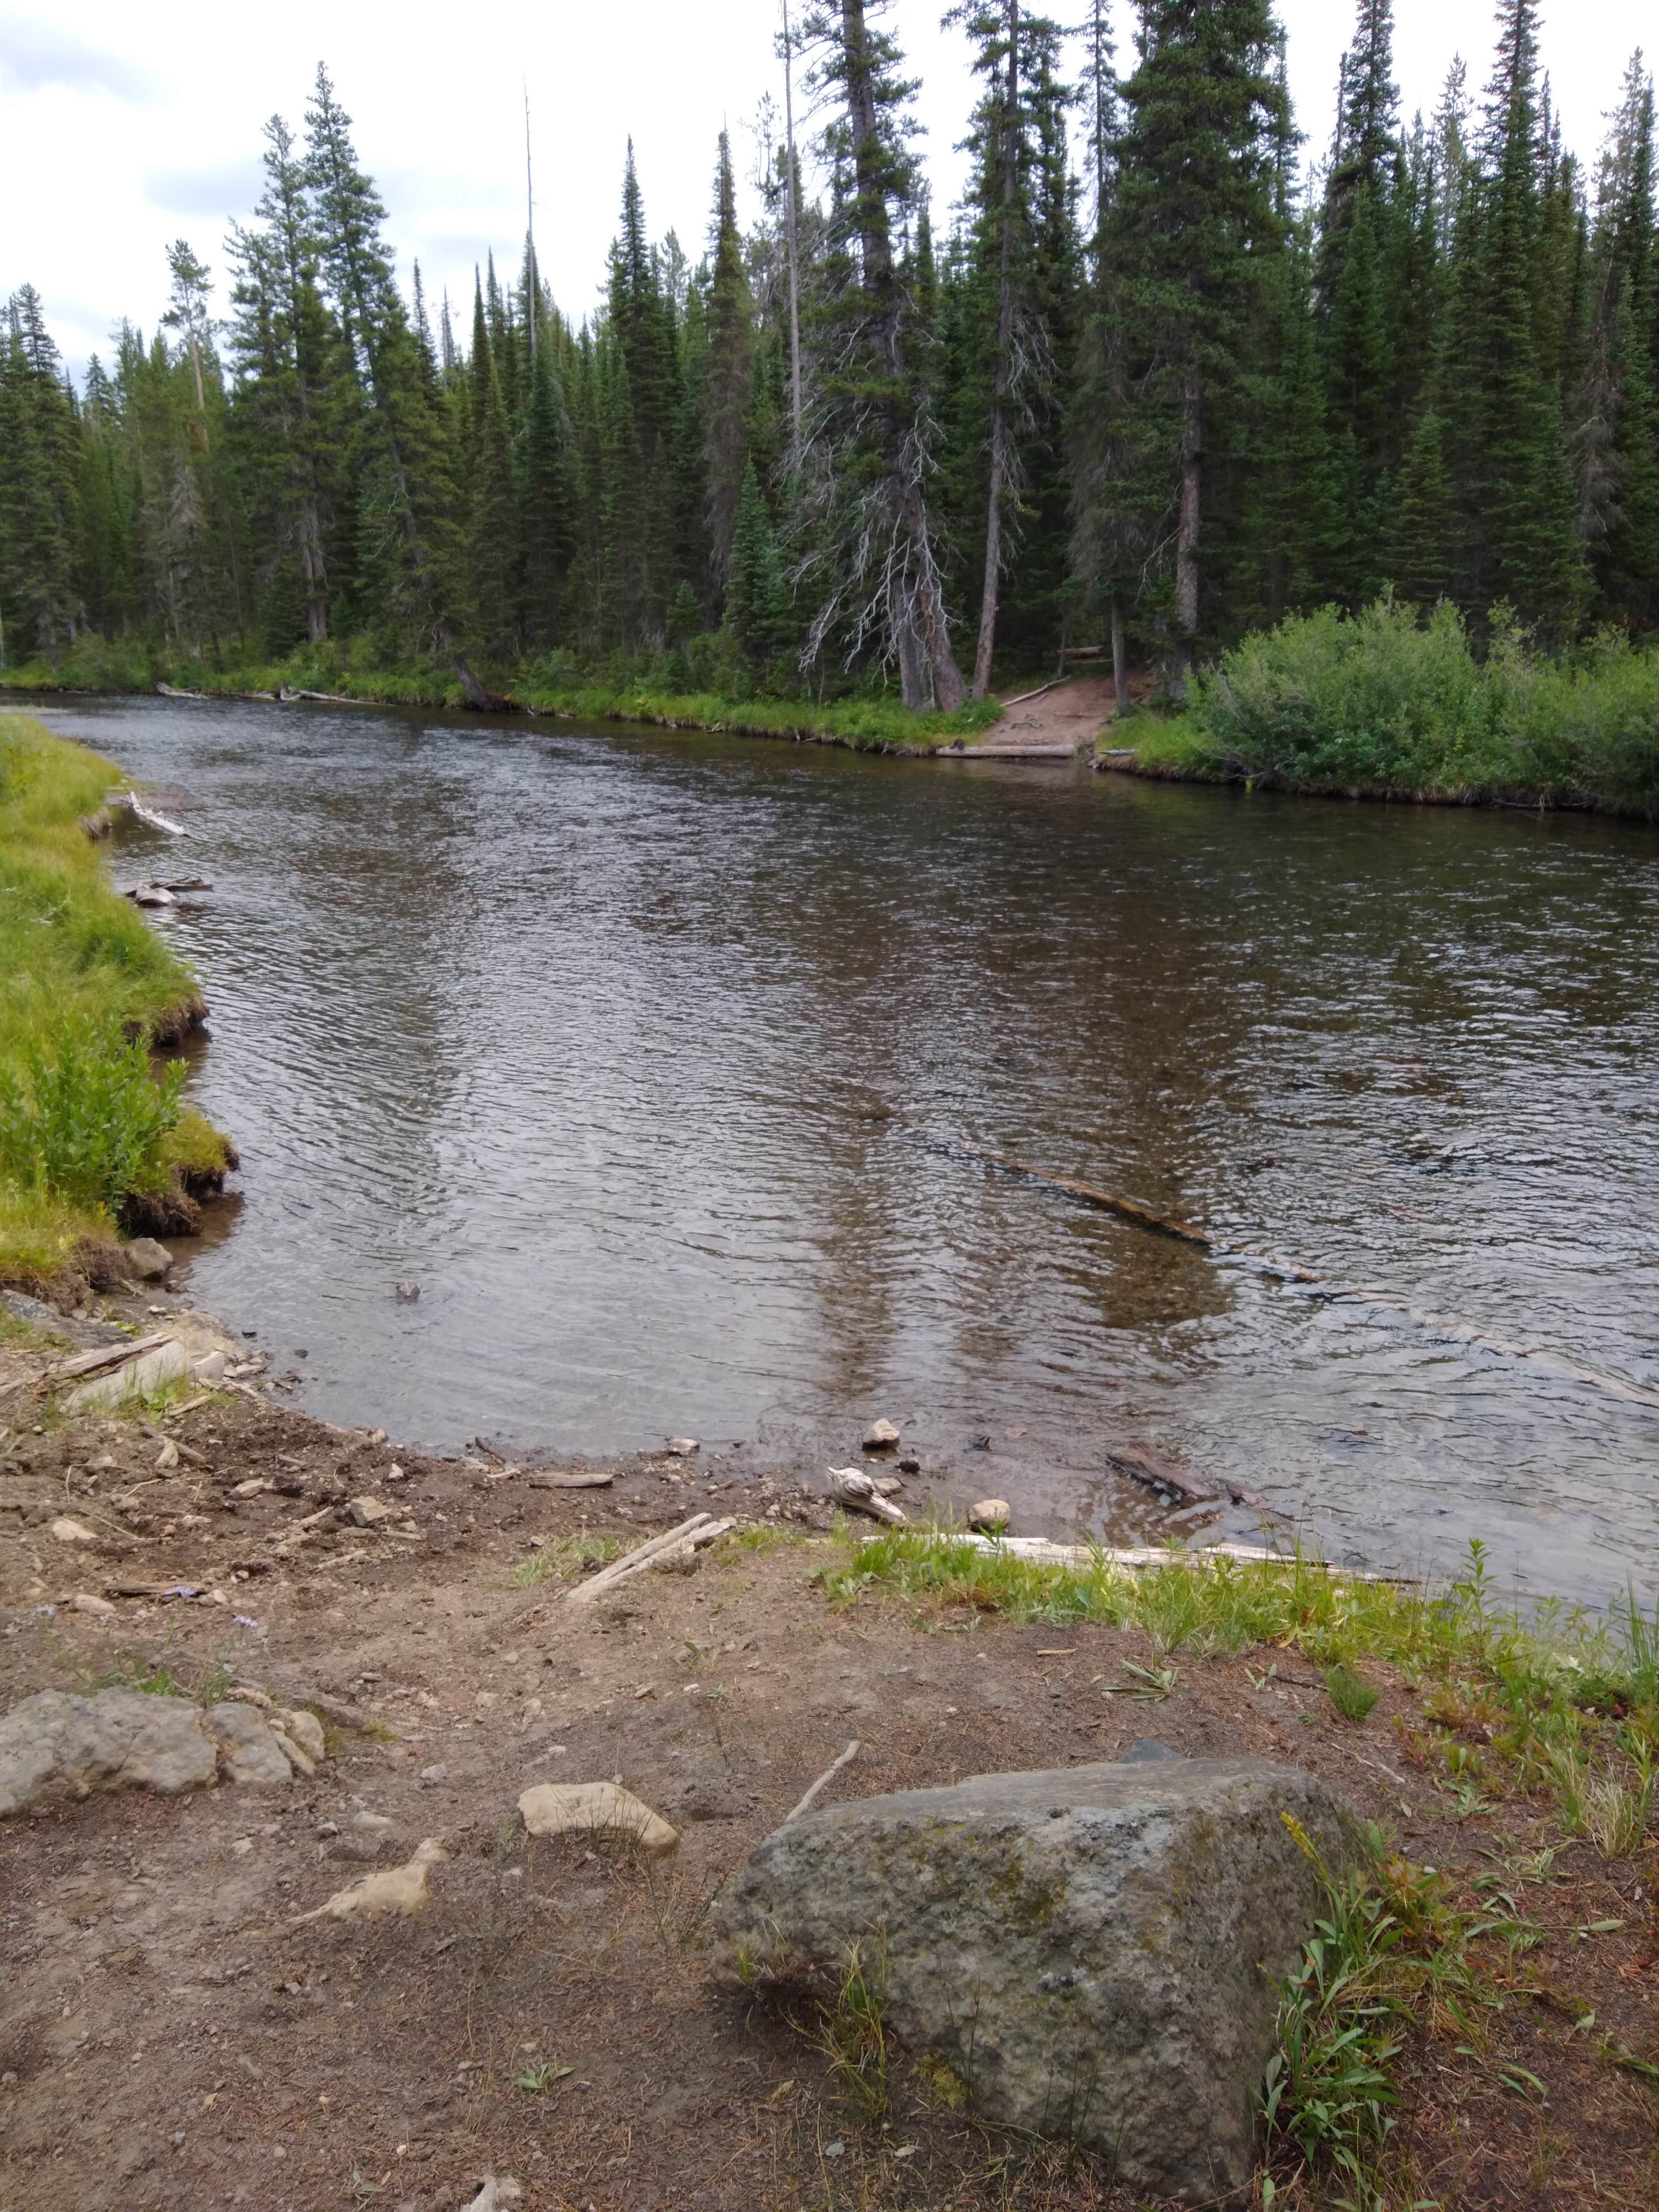 Camper submitted image from 9U1 Yellowstone National Park Backcountry — Yellowstone National Park - 4